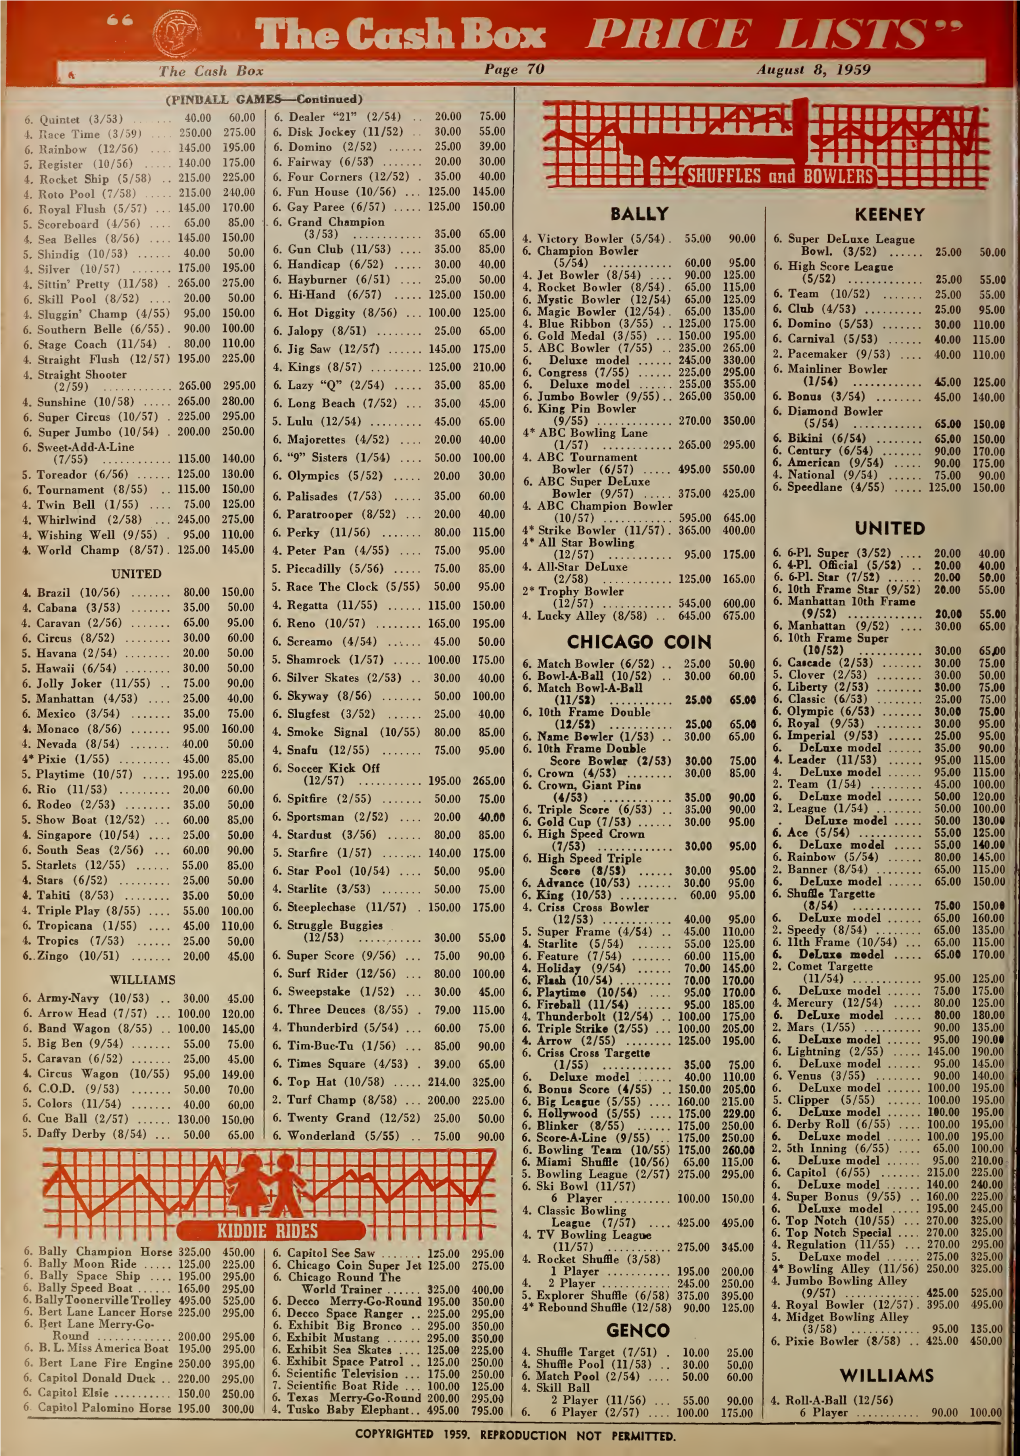 Cashbox PRICE LISTS ’ the Cash Box Page 70 August 8, 1959